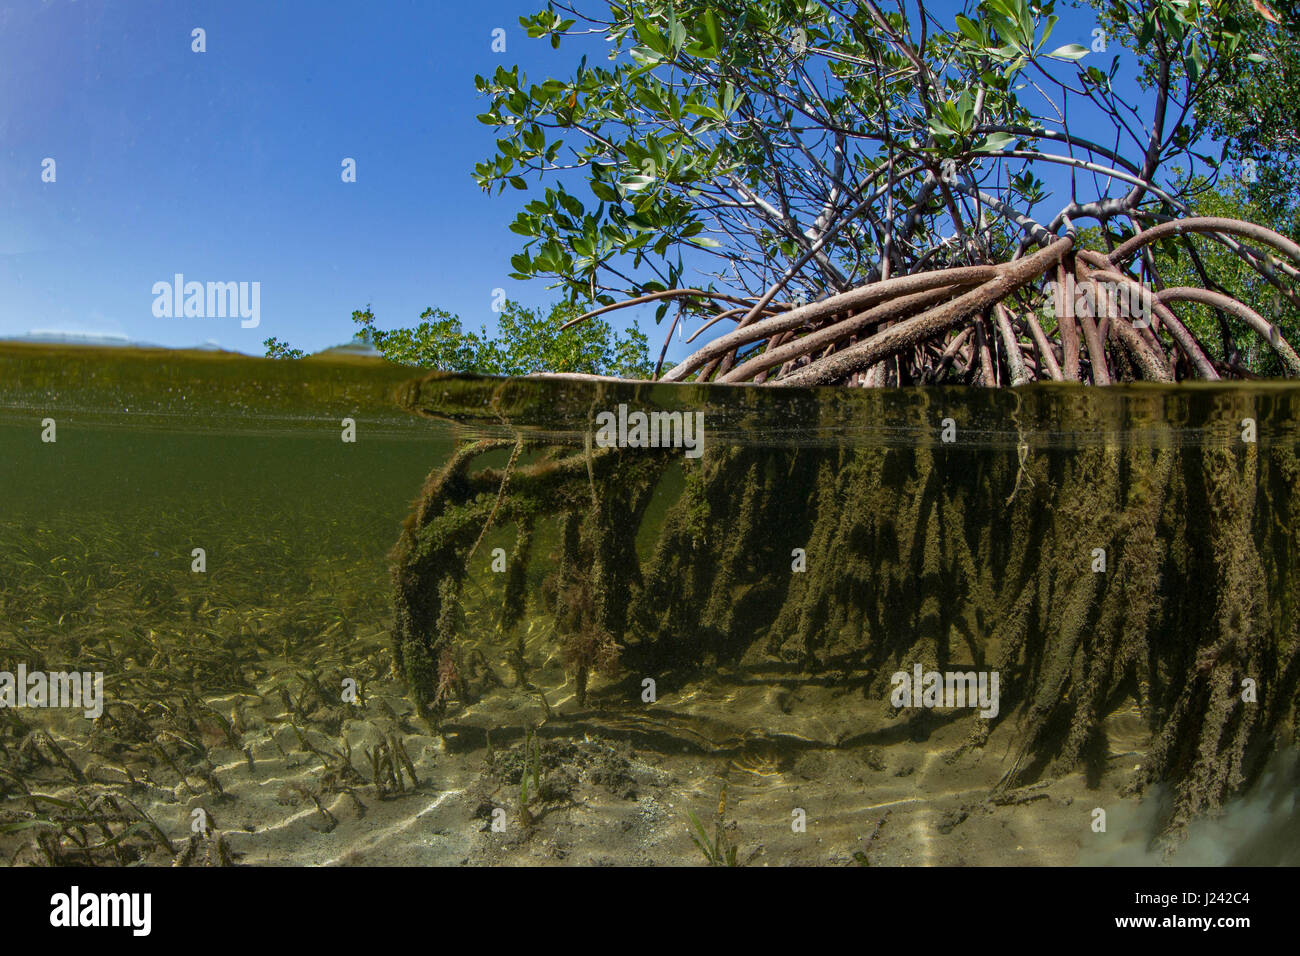 Over/under of Red mangrove tree. Stock Photo